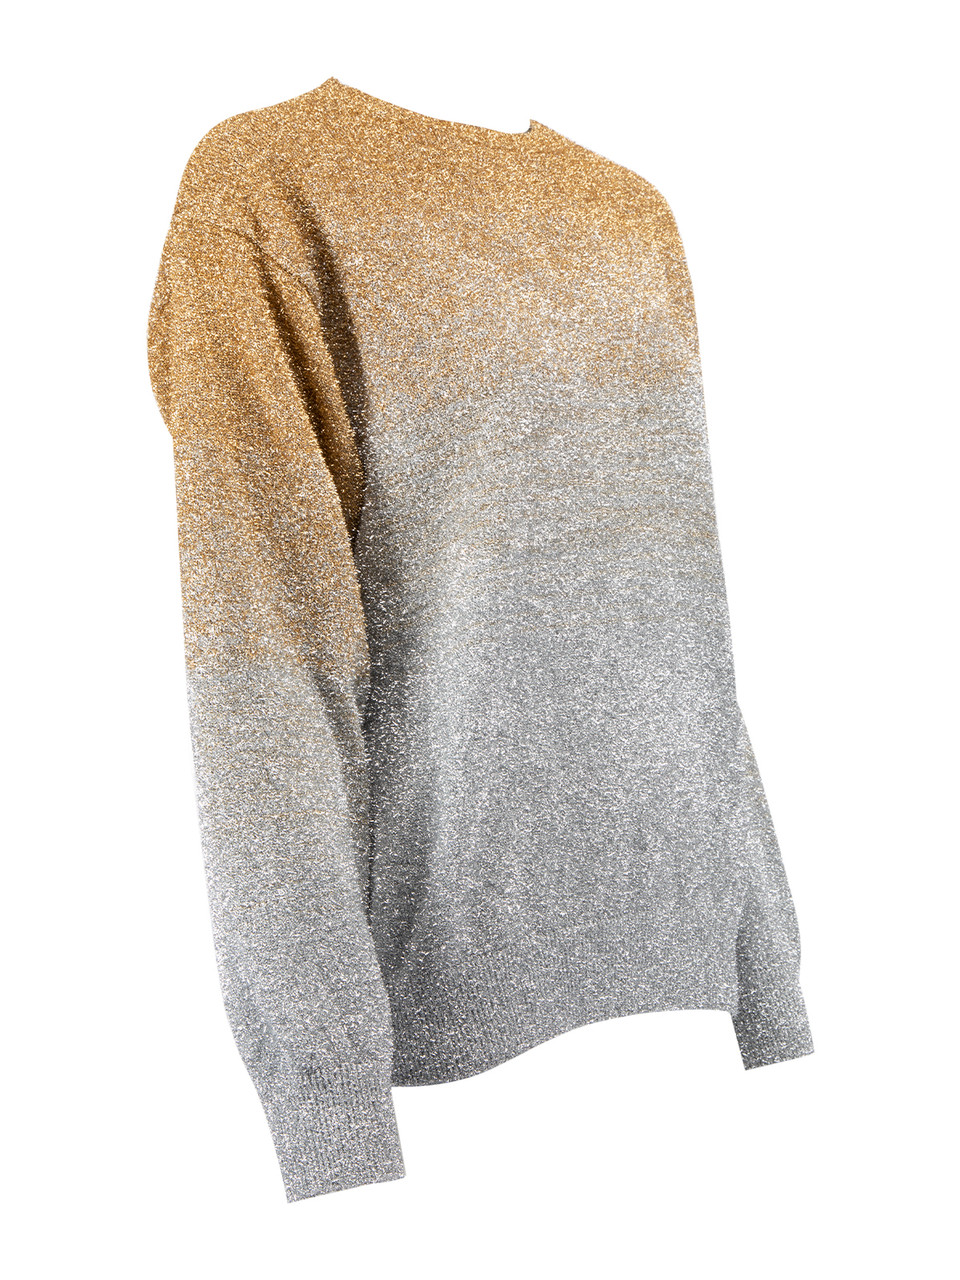 Dries Van Noten Gold and Silver Shimmer Sweater